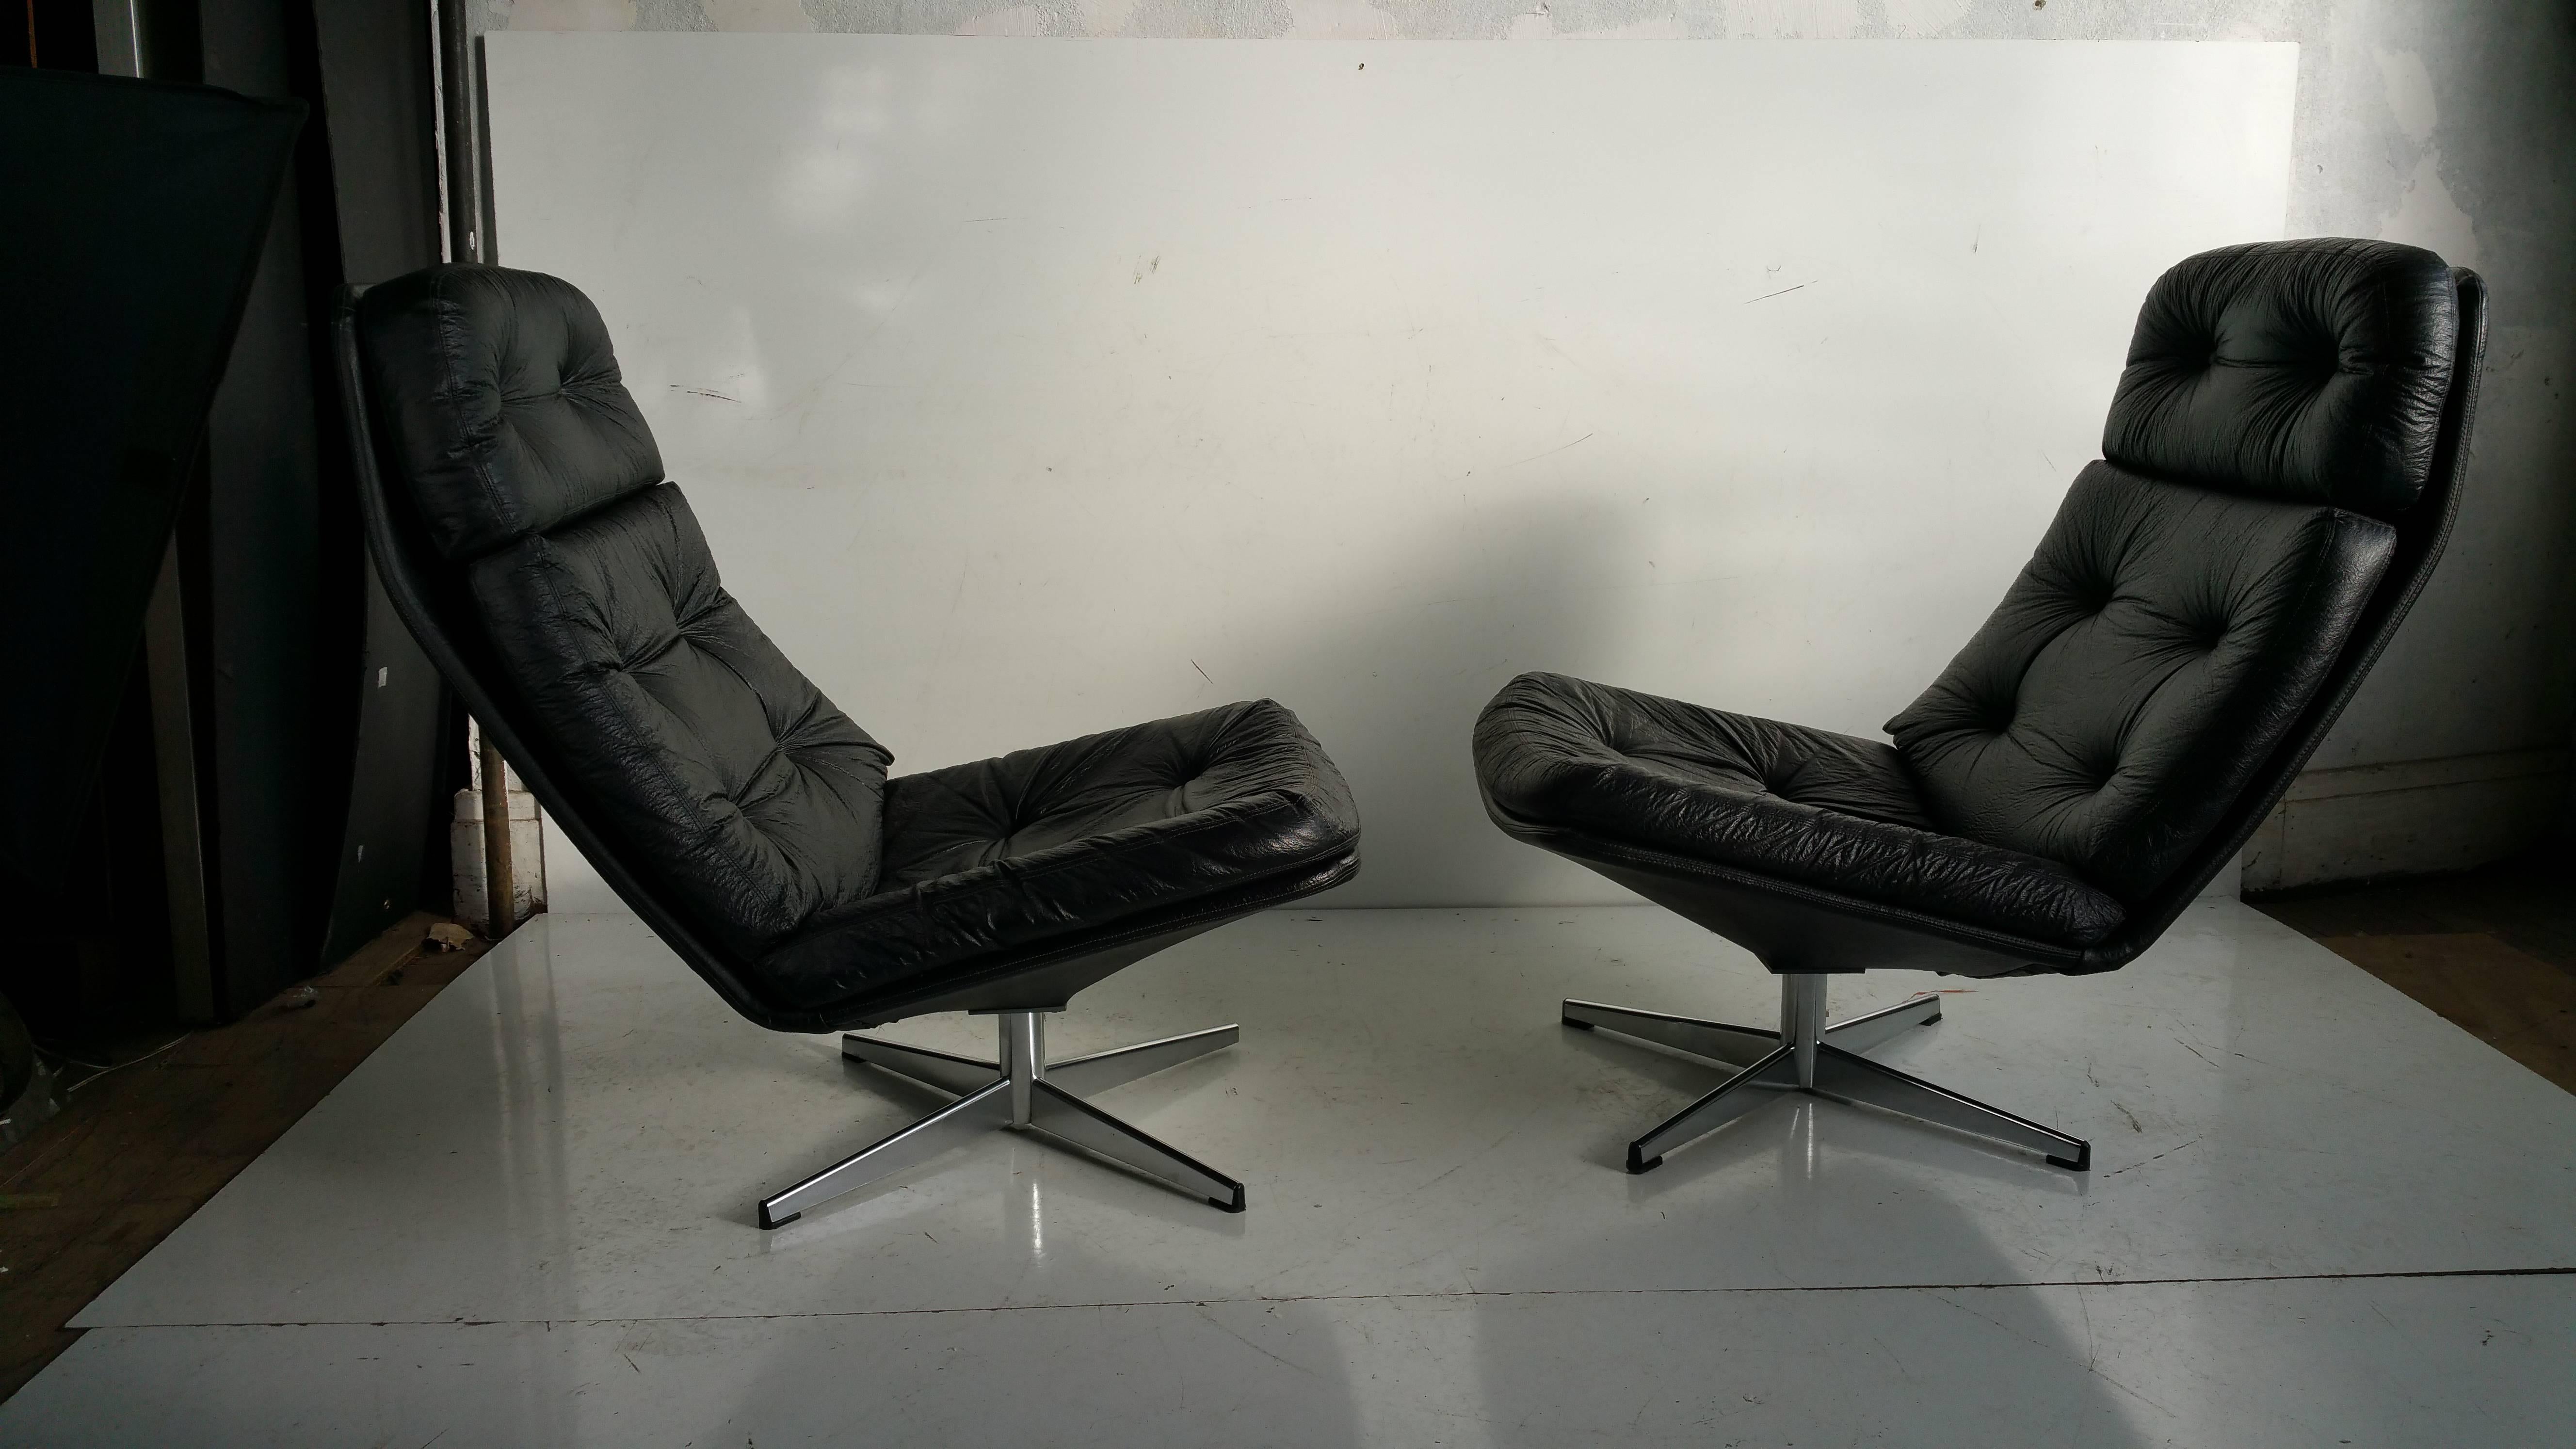  Pair of Mid Century Modern lounge chairs by Overman Unusual form,. Black crackle vinyl upholstery with removable cushions and chrome swivel bases which offer a modern space age look and extremely comfortable seating ..